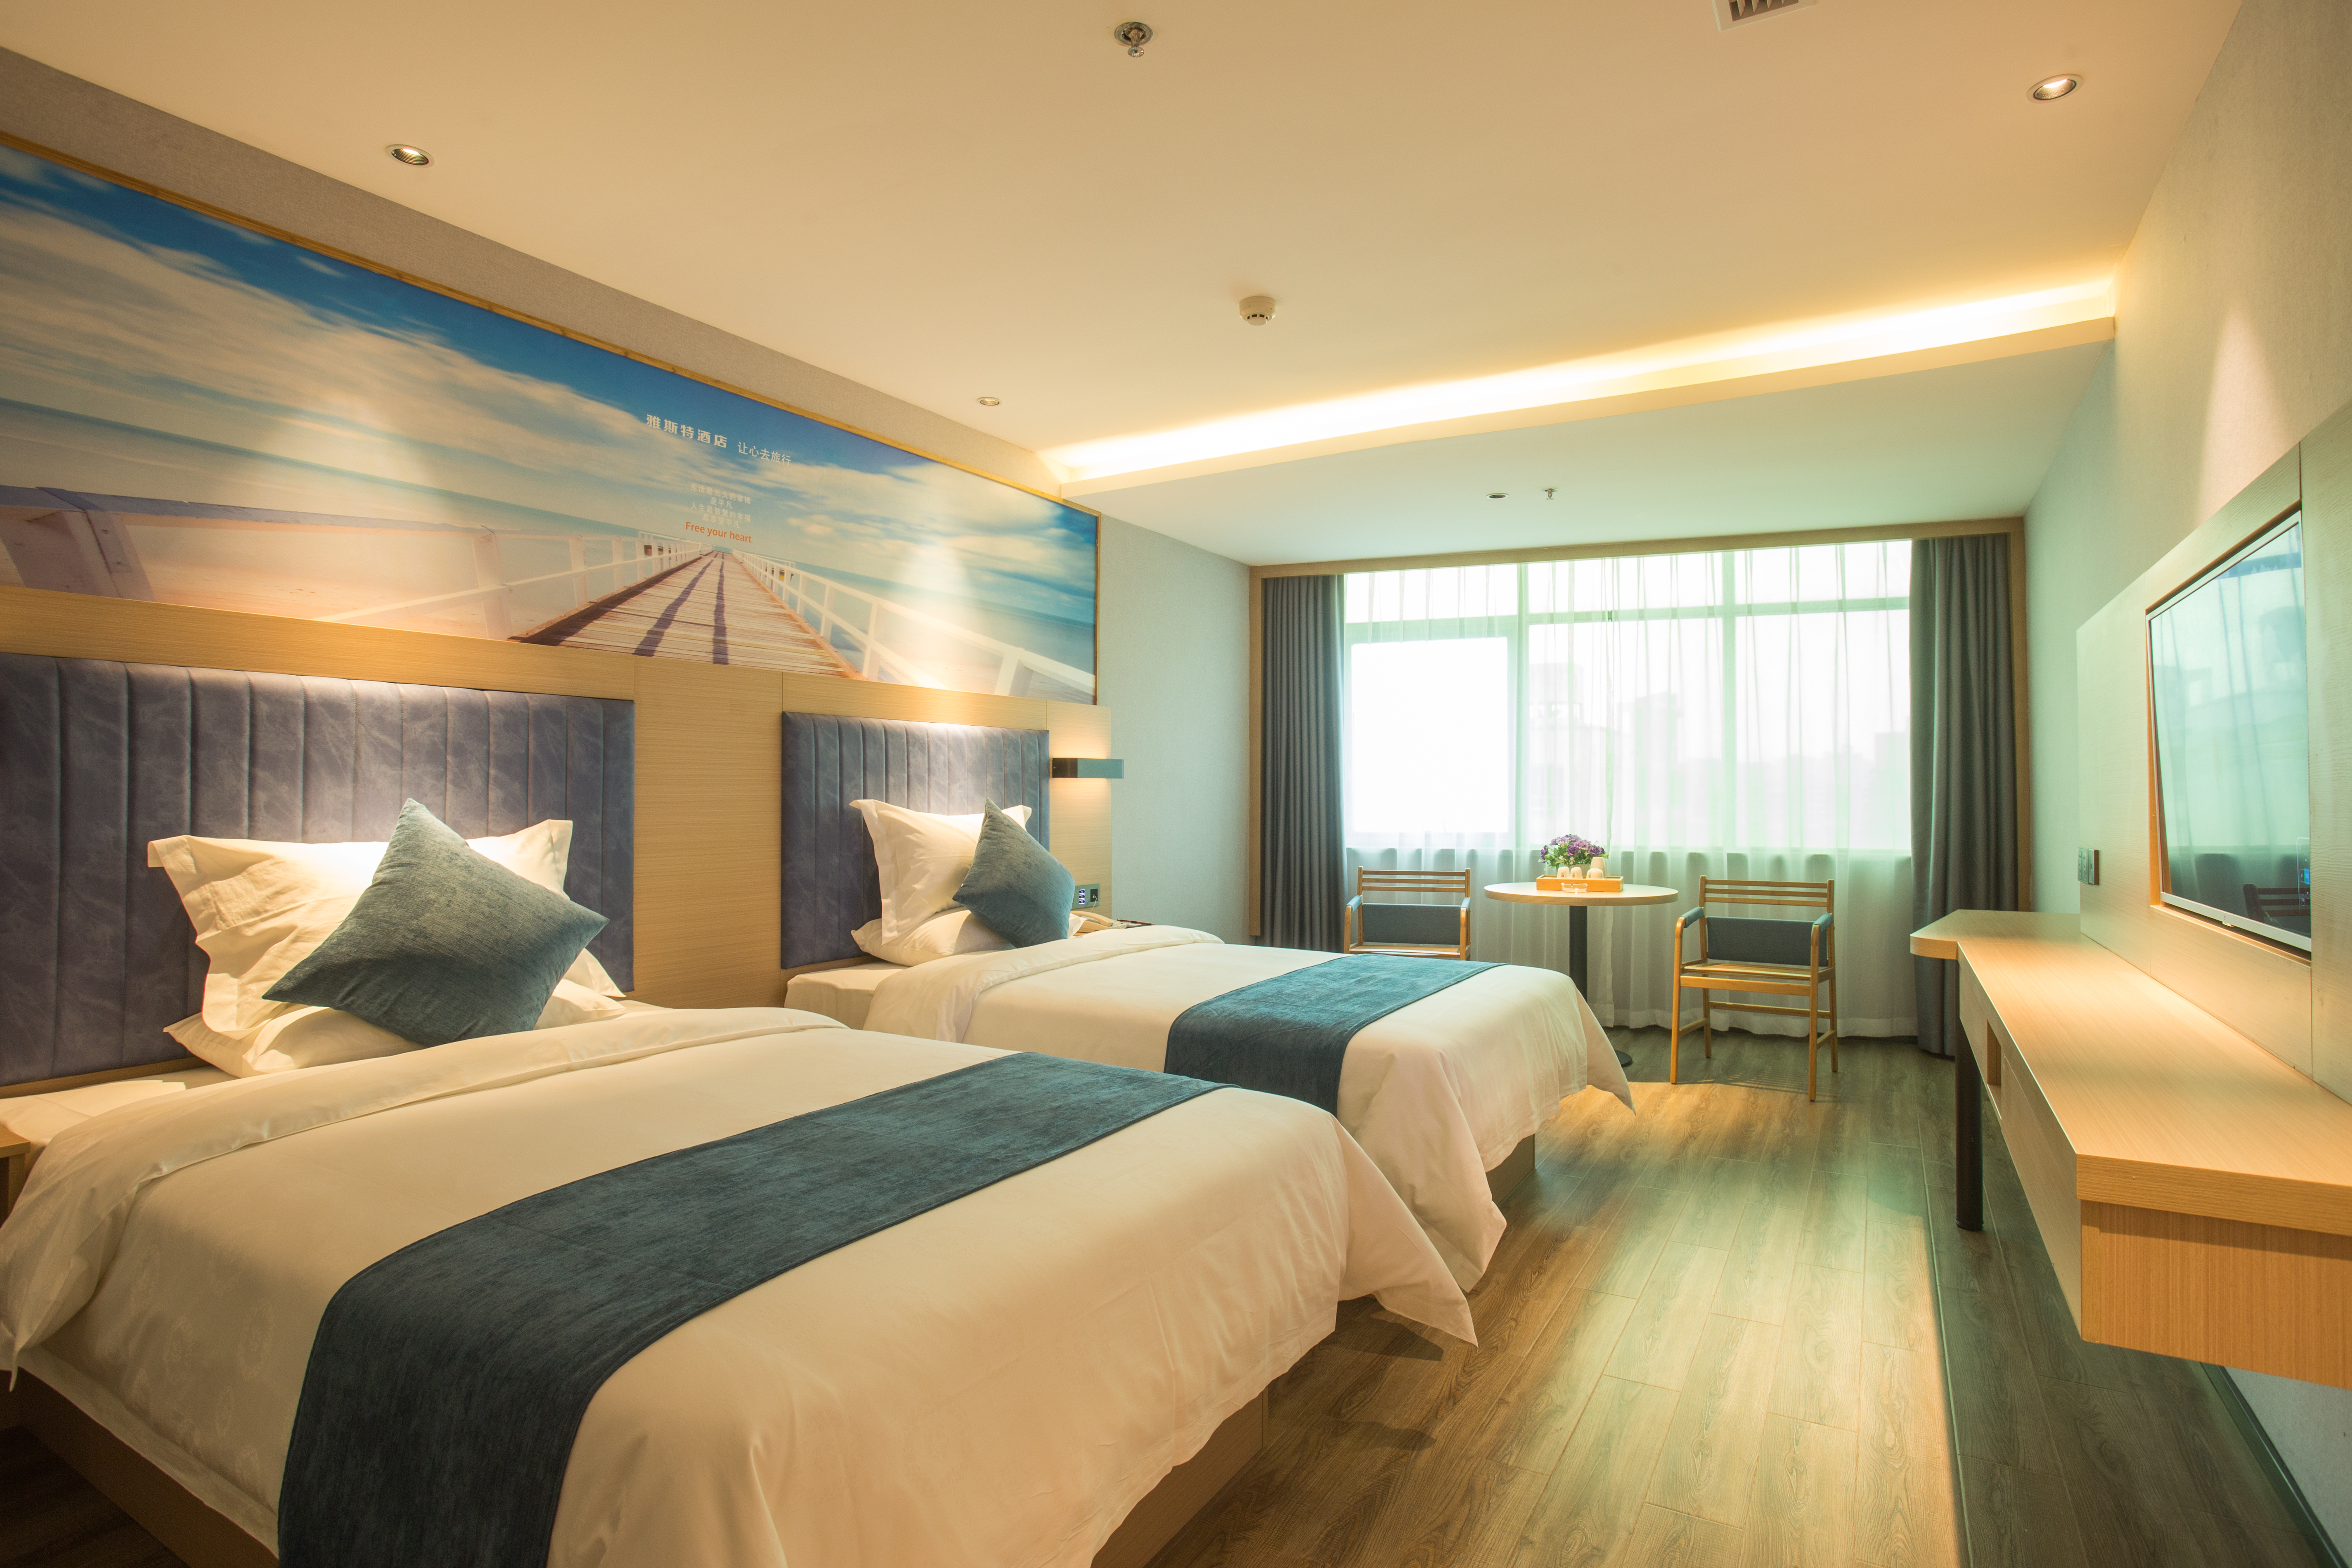 Rooms for chat in Zhangzhou